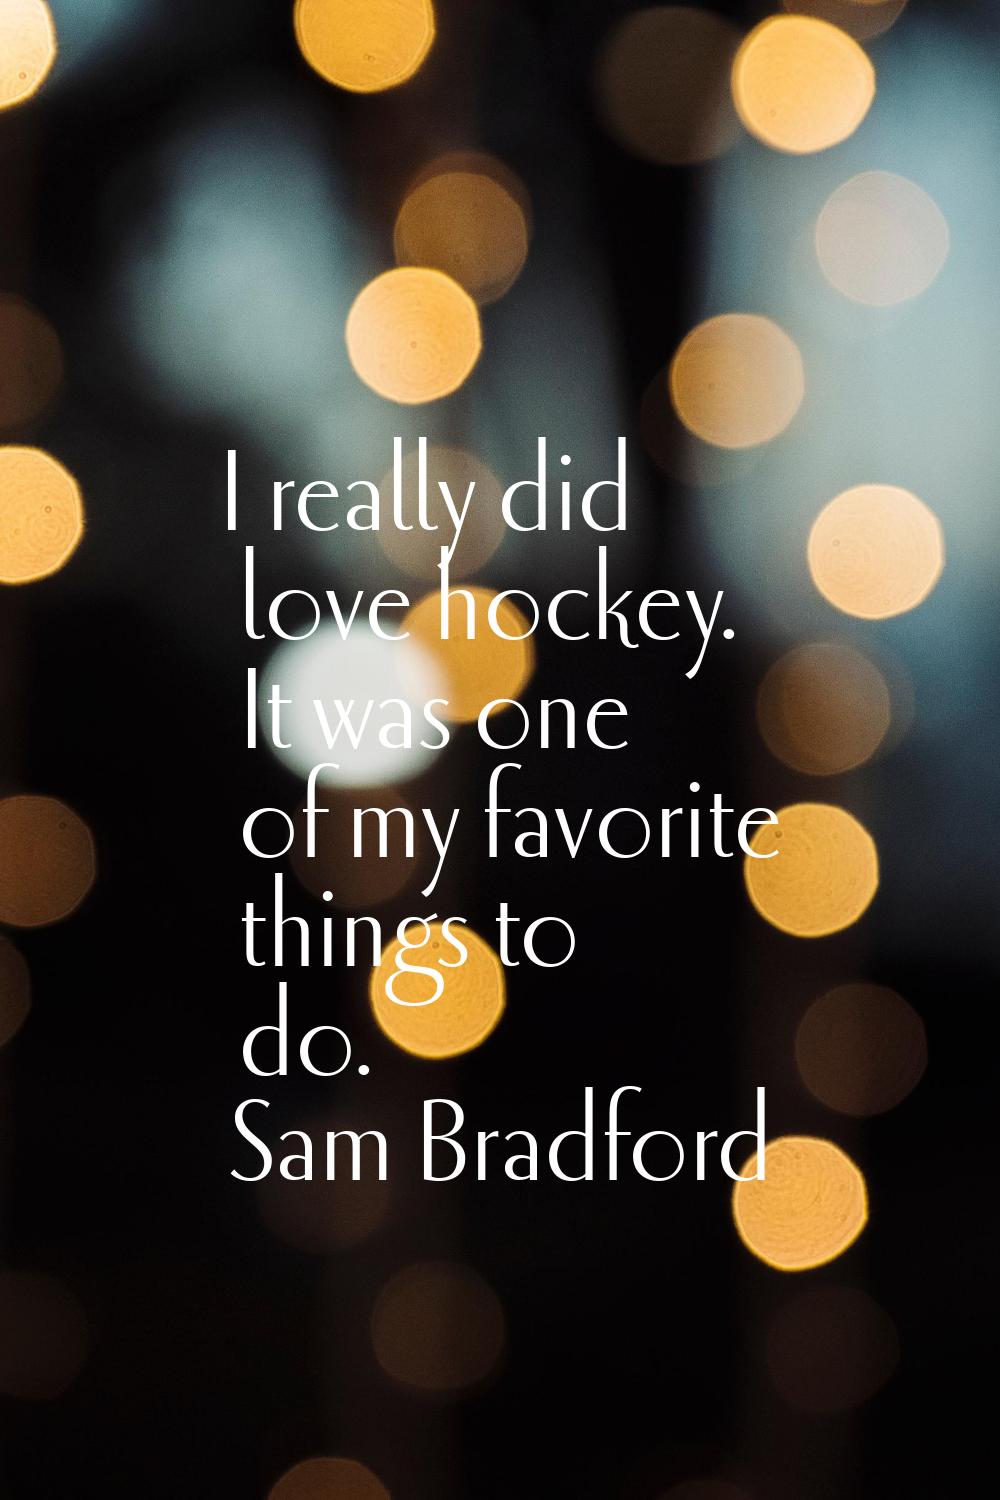 I really did love hockey. It was one of my favorite things to do.